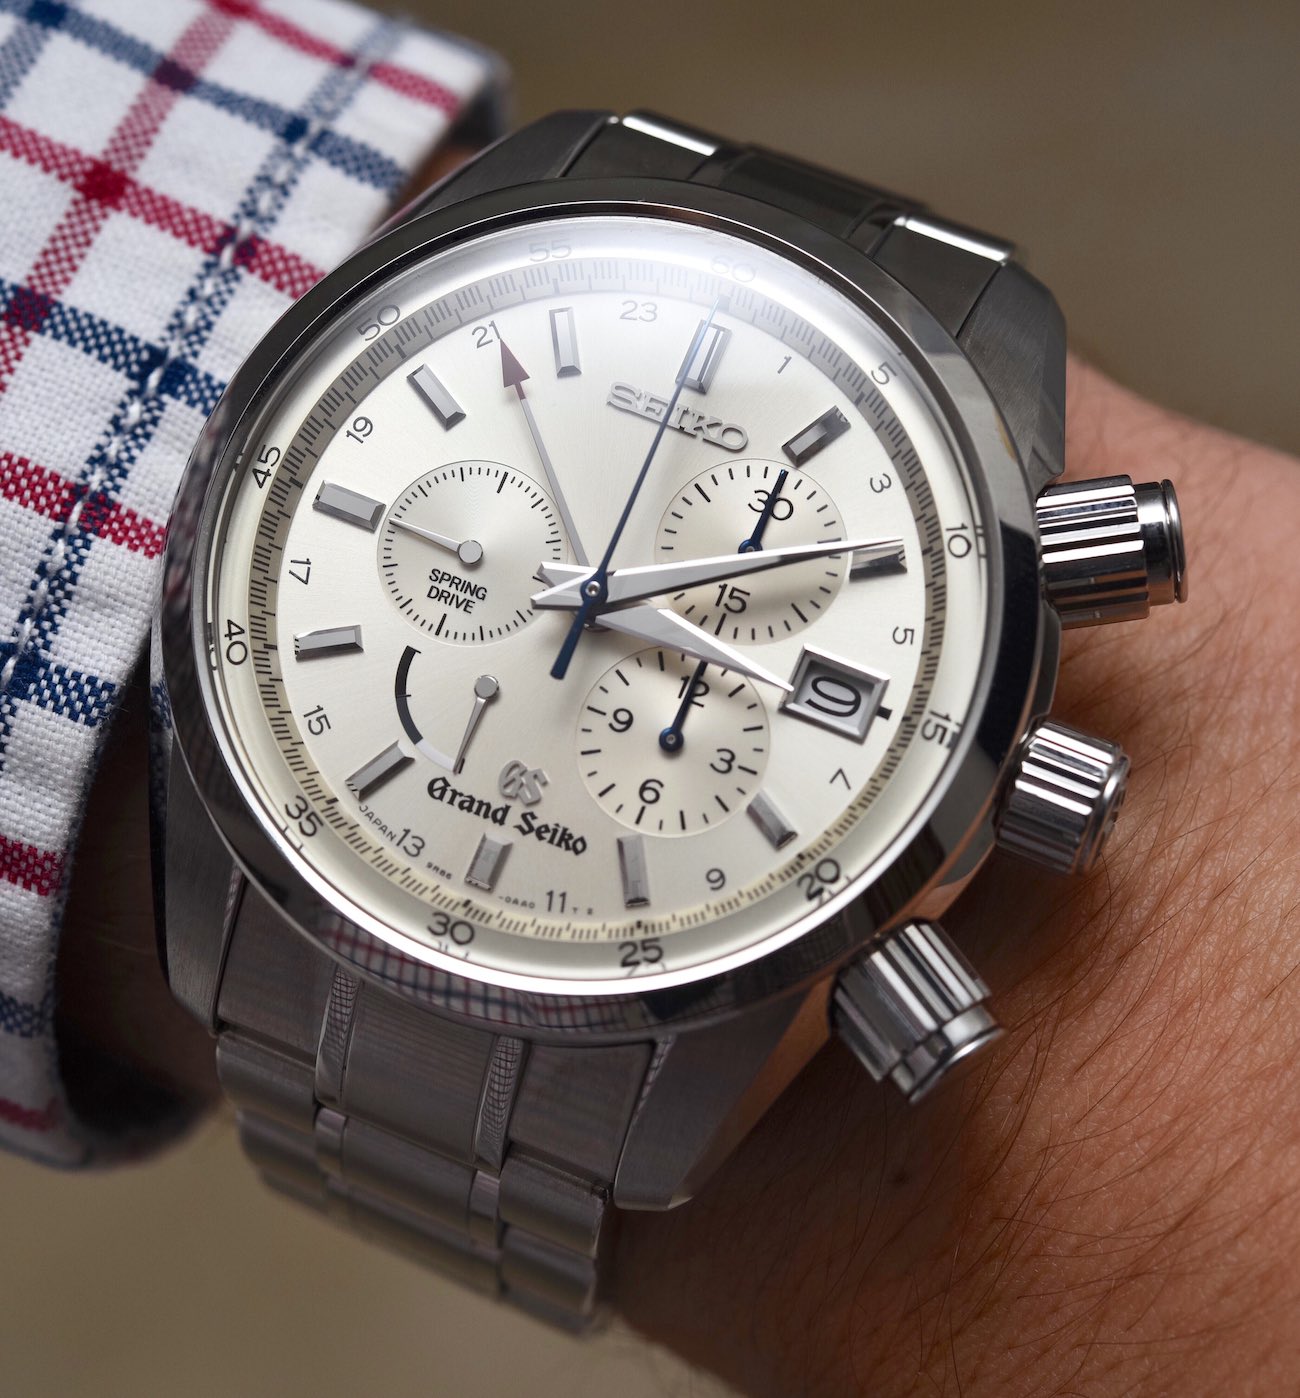 Grand Seiko Spring Drive Chronograph SBGC001 Watch Review | Page 3 of 3 ...